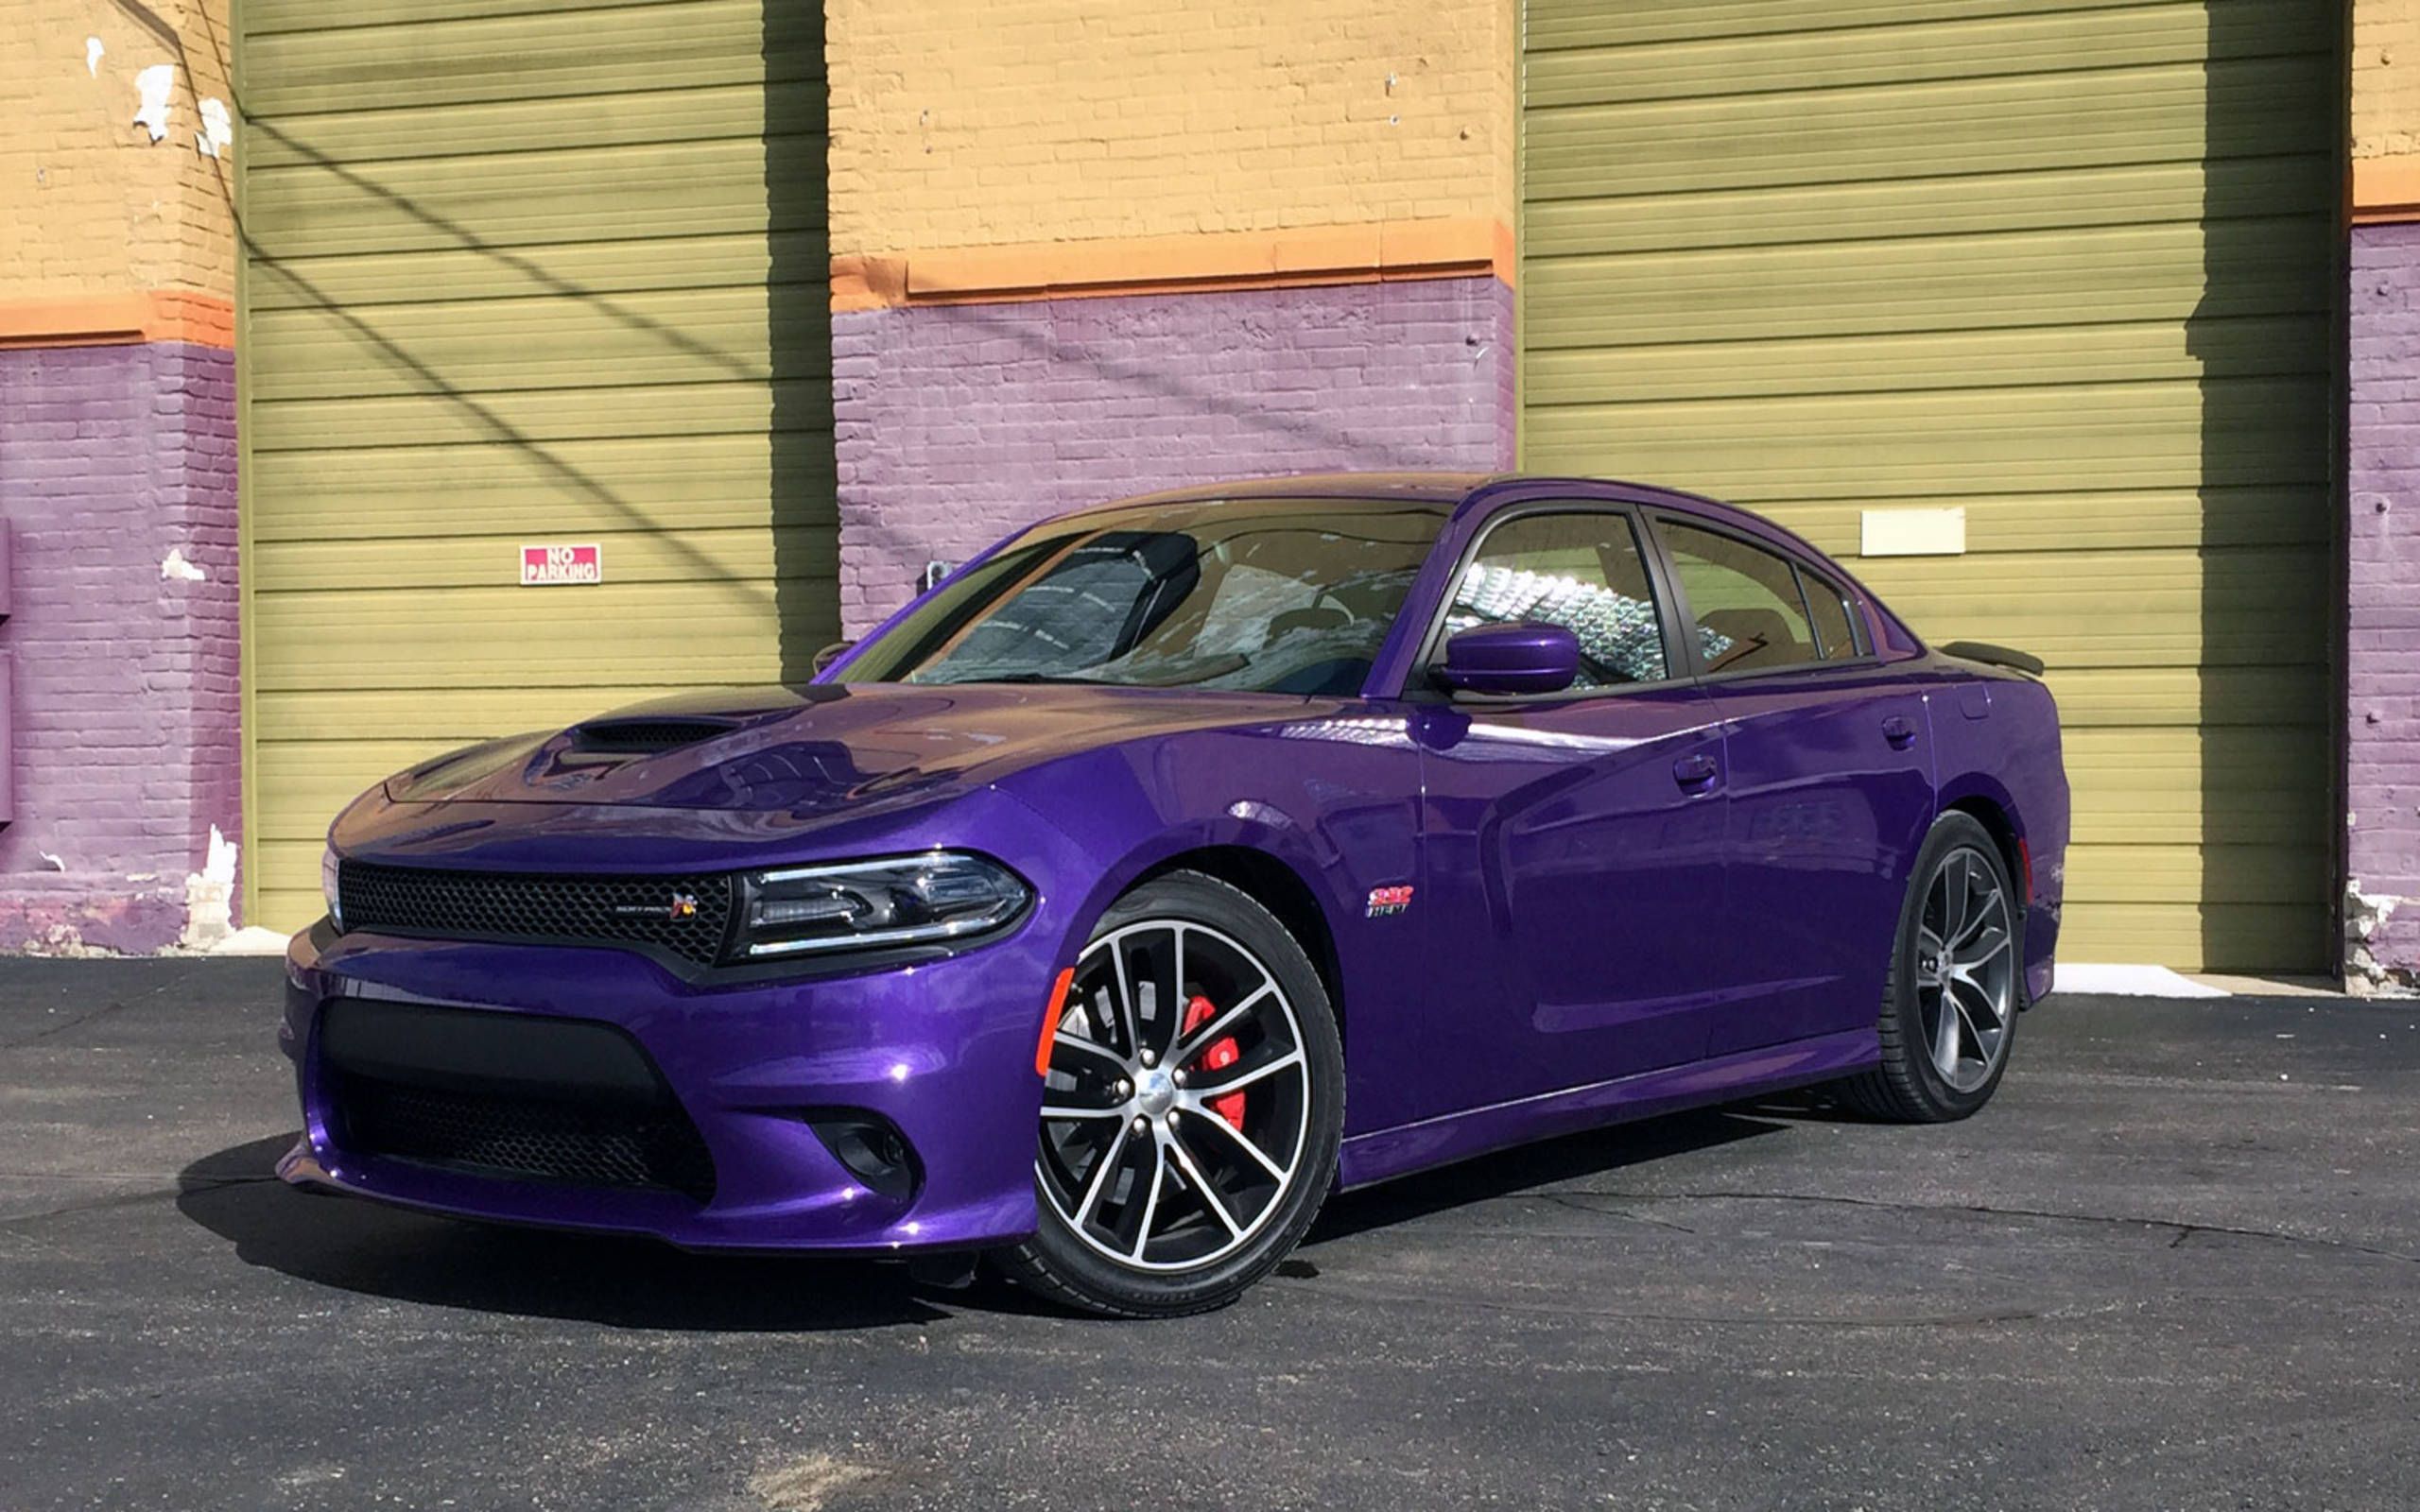 2016 Dodge Charger R/T Scat Pack drive review